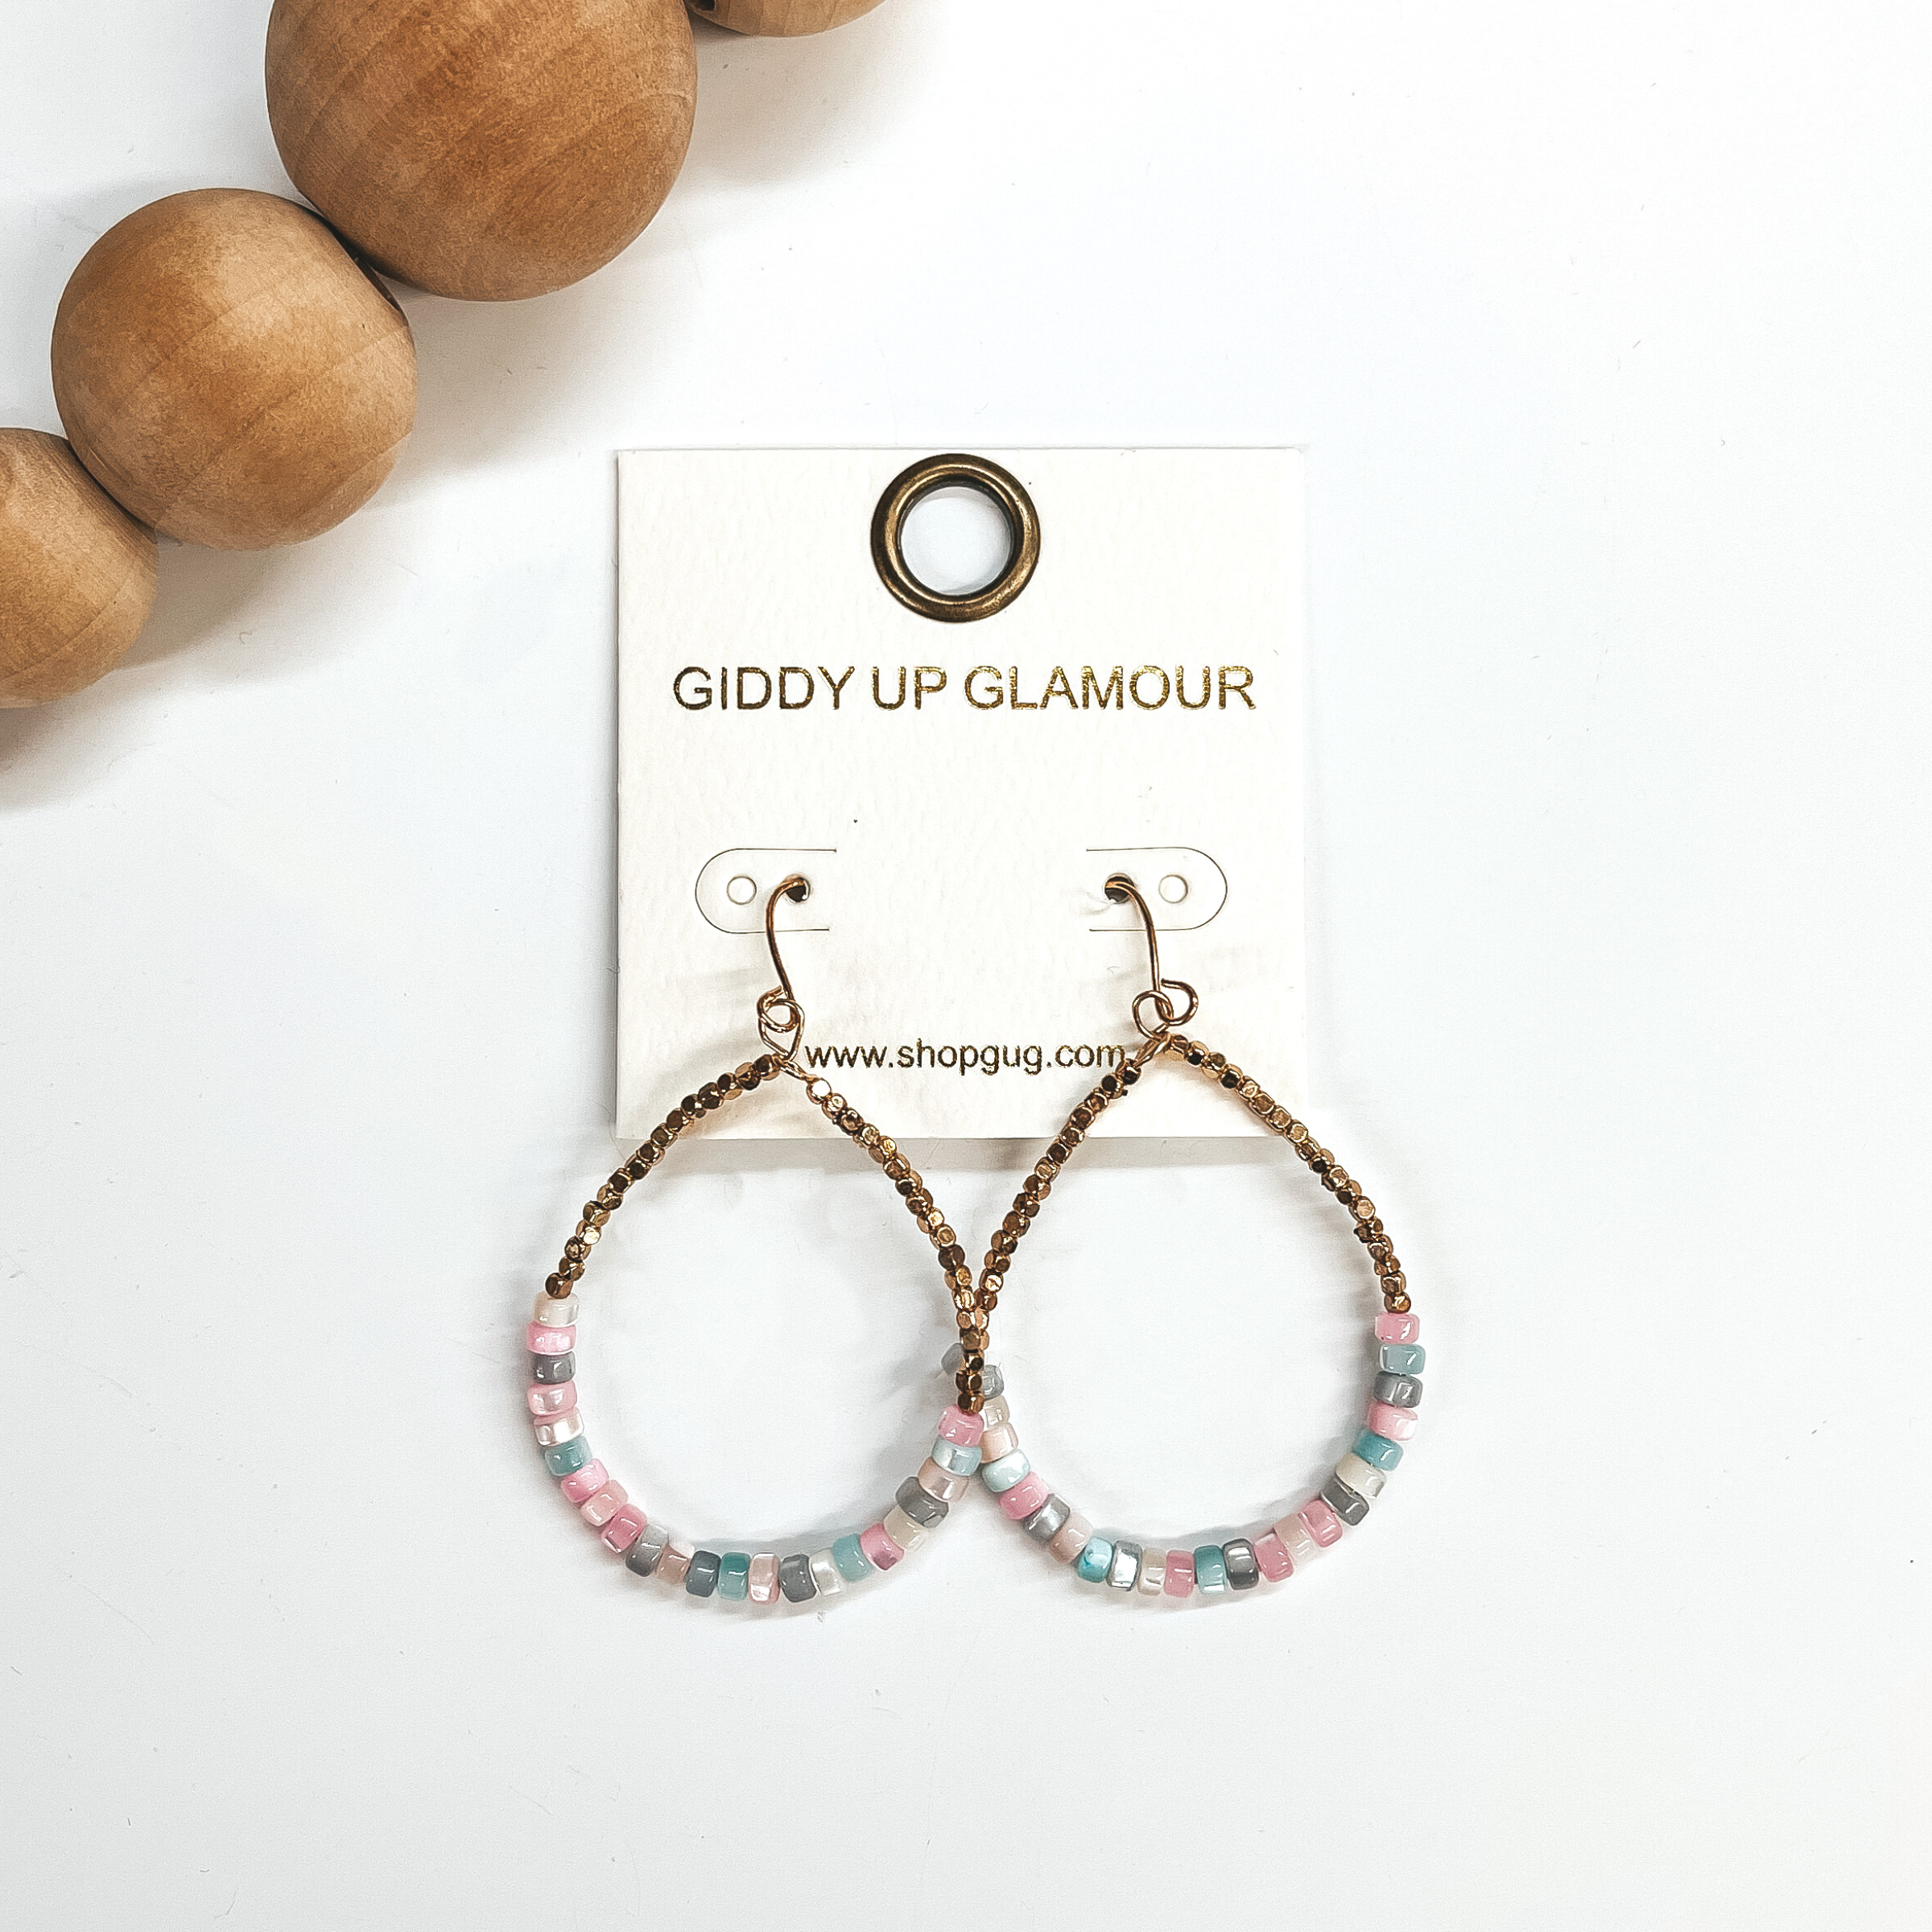 These are teardrop earrings with a fish hook backing. Bottom half has mother of pearl beads in multicolor,  light blue, light pink, pink, gray, and ivory. with small gold square beads in the top. These  earrings are taken on a white background and brown  wooded beads in the corner as decor.